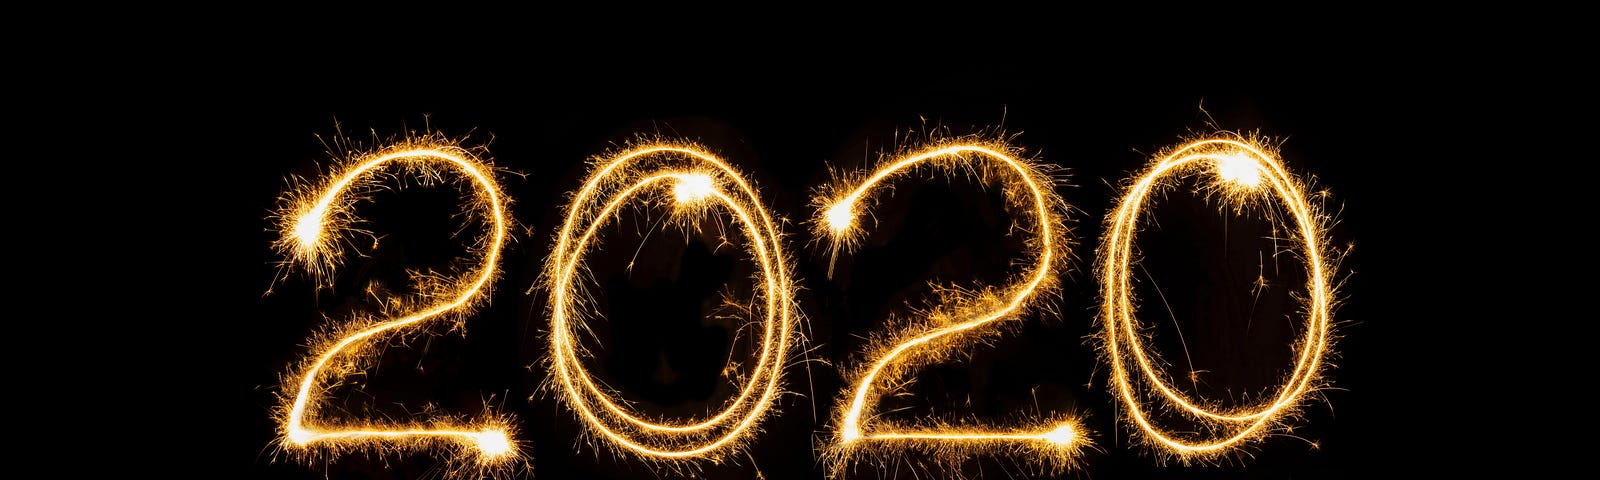 An image of bright gold fireworks spelling out “2020” against a black background.